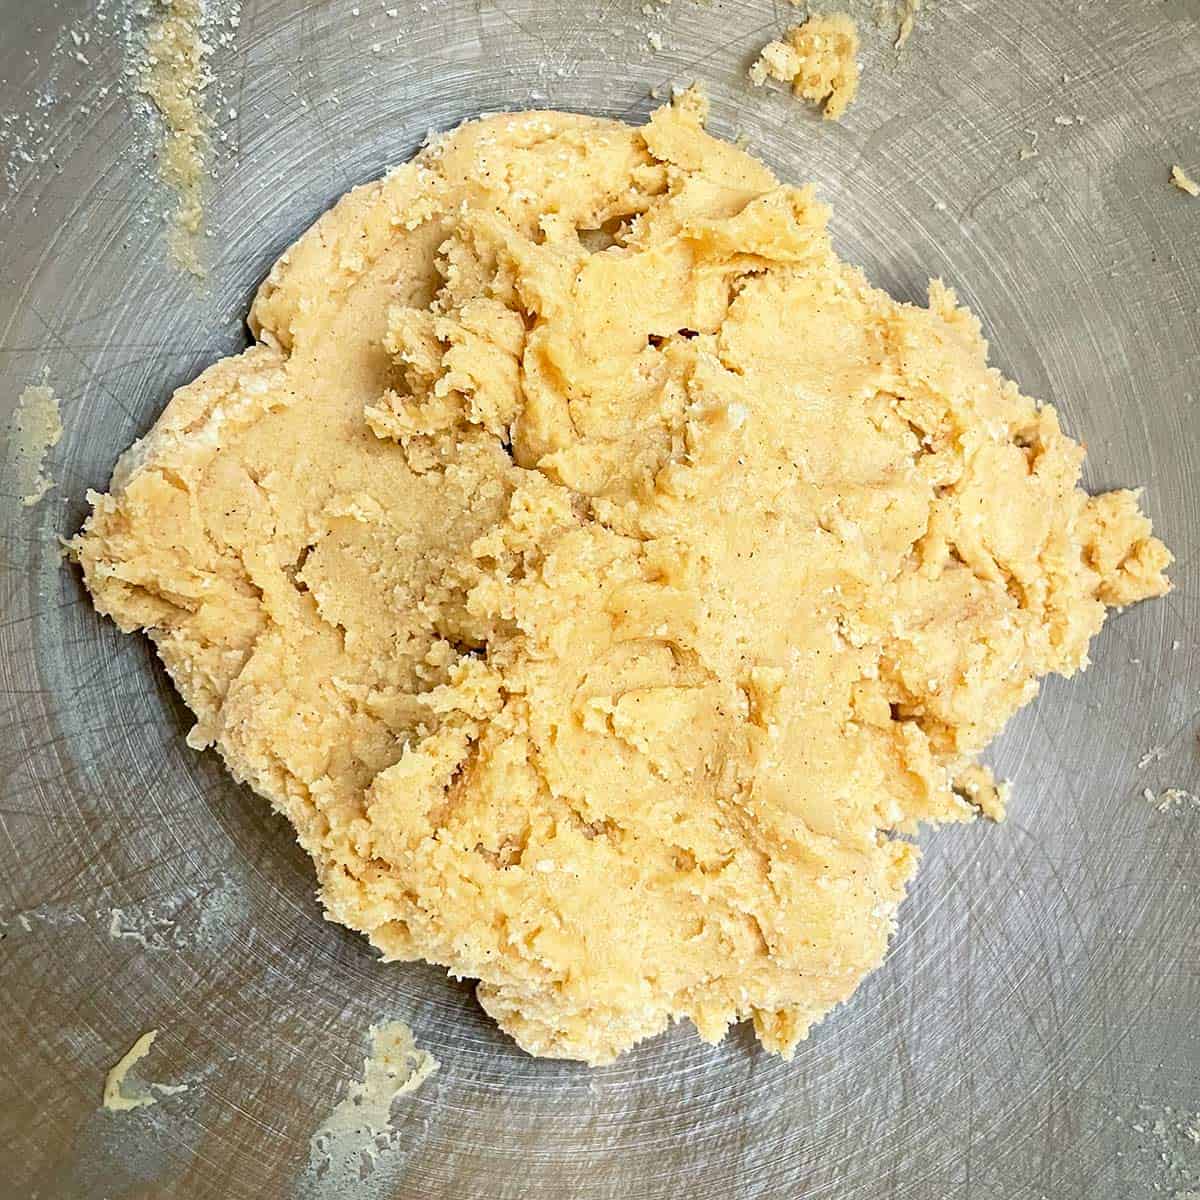 All the pumpkin spritz cookie dough mixed together in a mixer bowl.